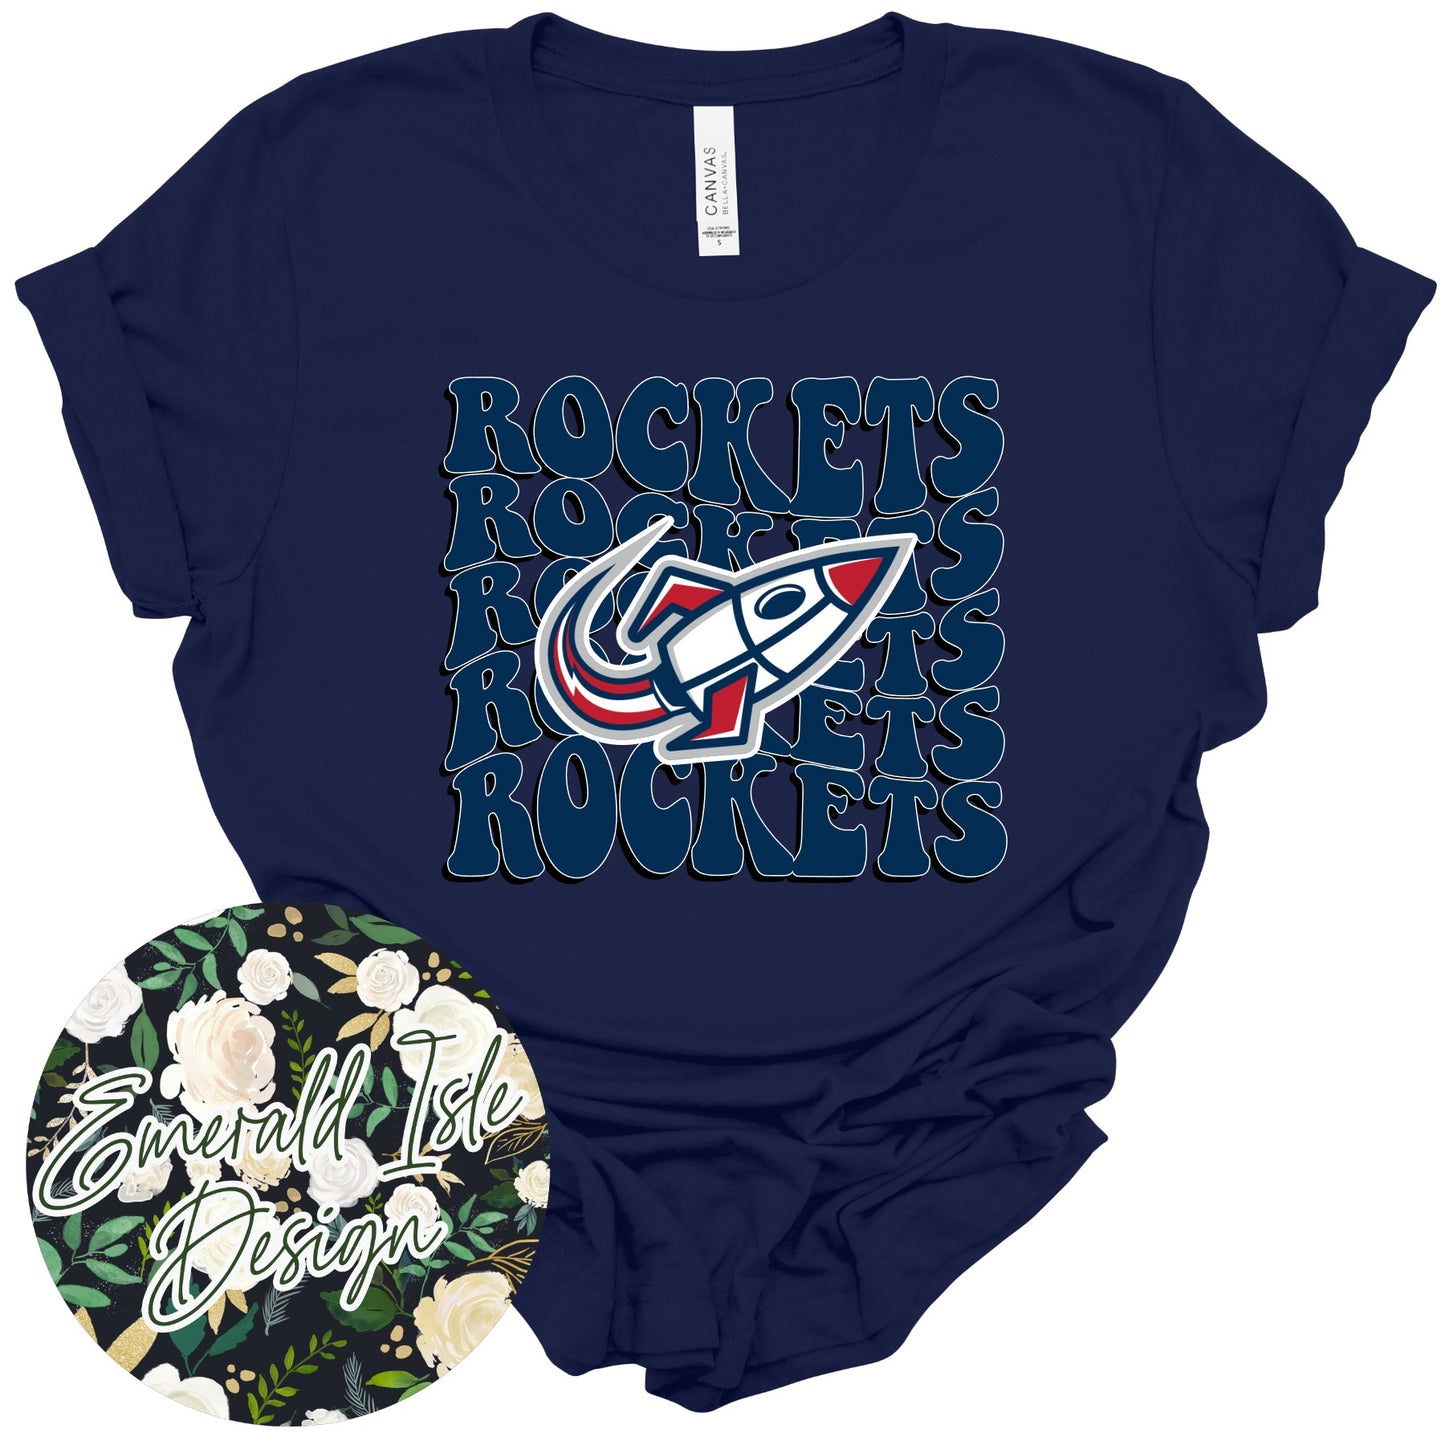 Rosa Parks Rockets Groovy Repeat Design